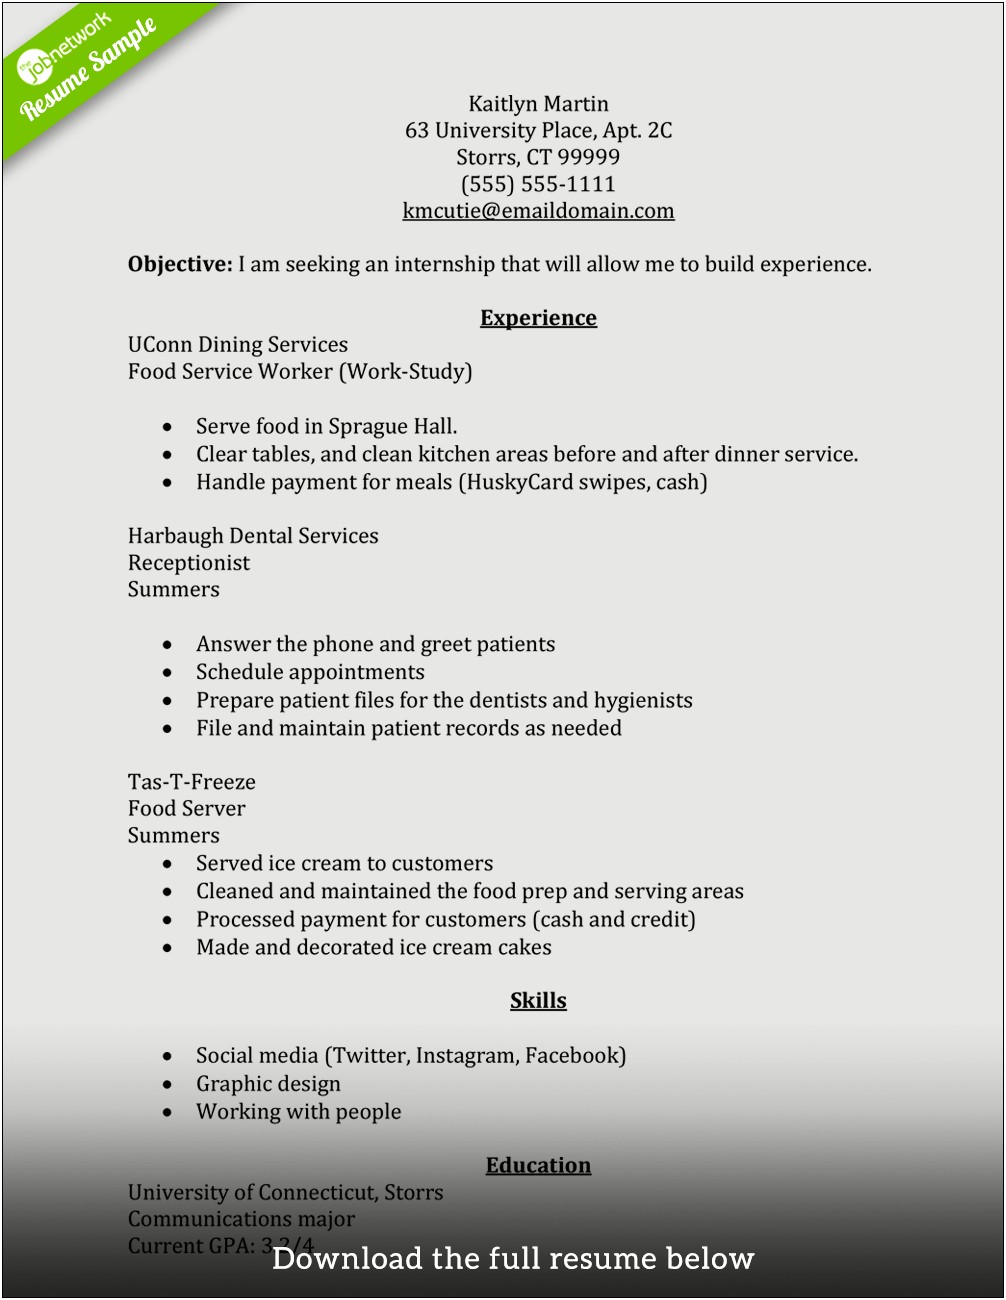 Adding Writing Experience To A Resume